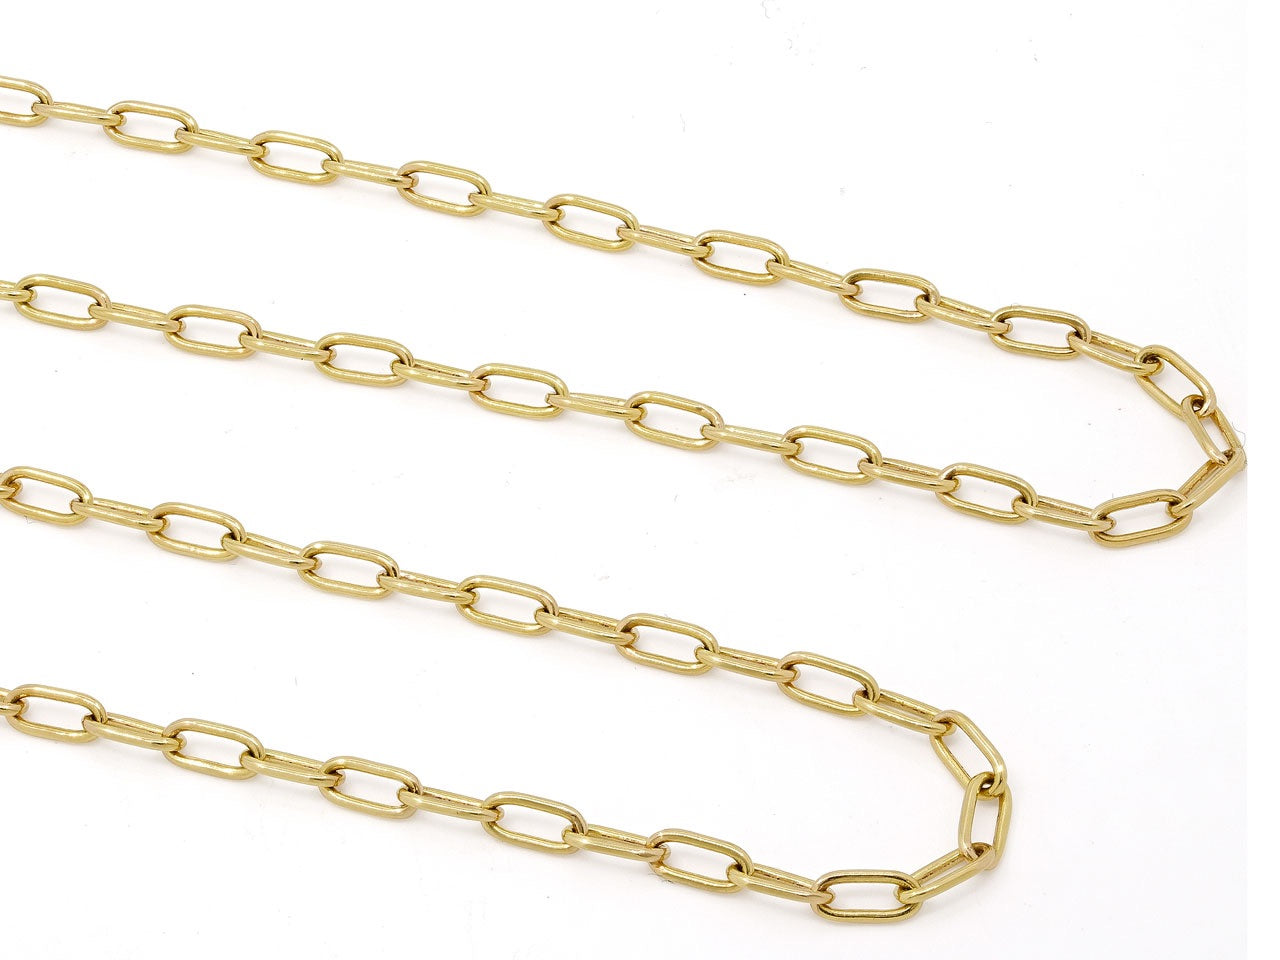 Italian Cable Link Chain in 18K Gold, by Beladora, 22 Inches